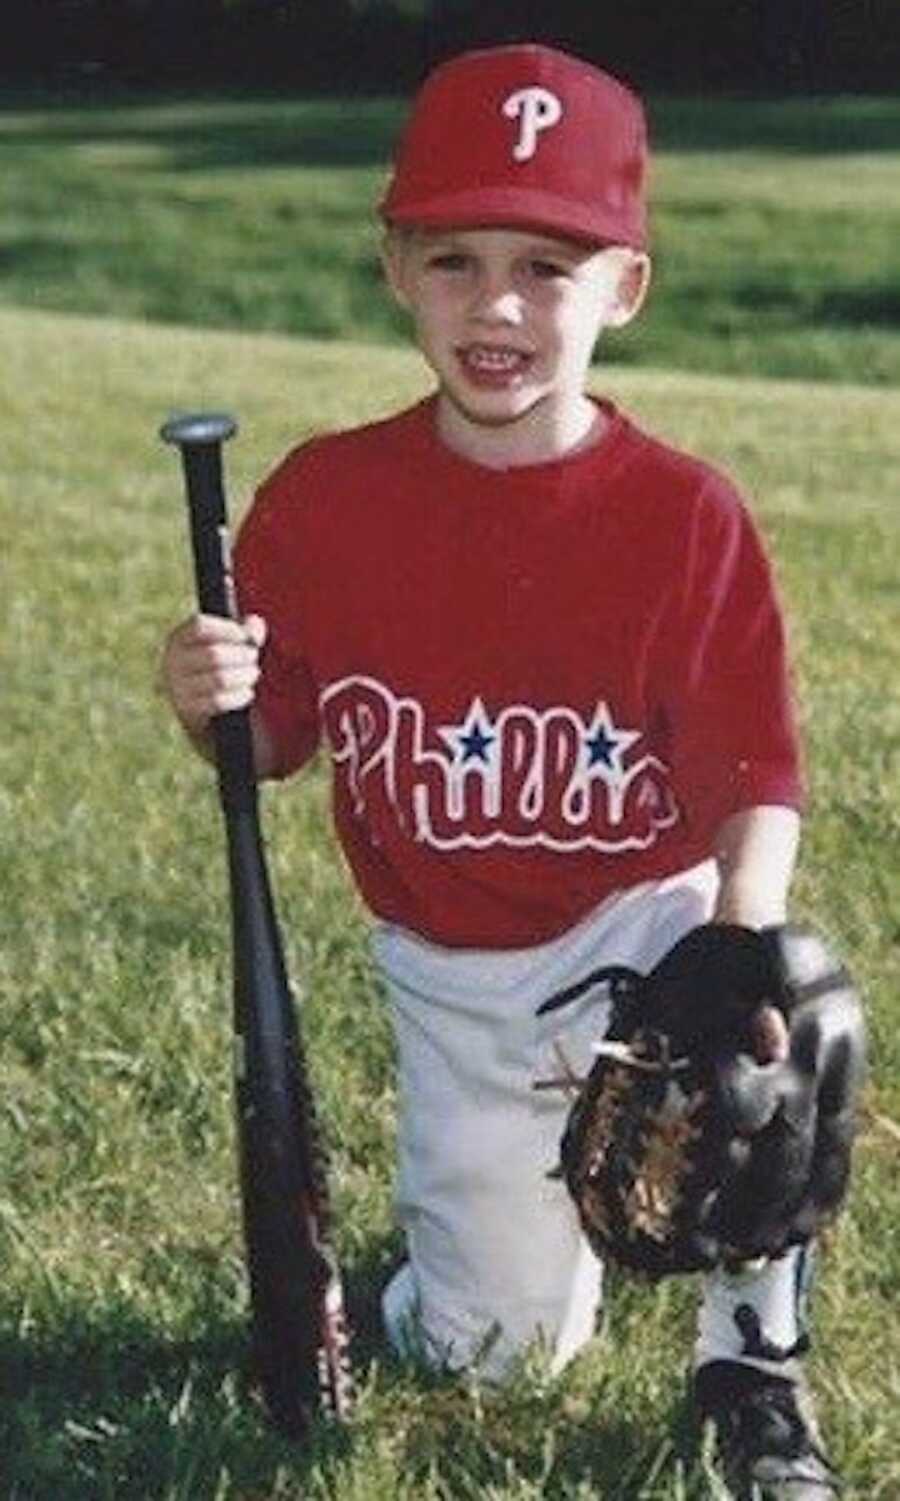 Young boy holding a baseball bat and glove. Wearing red shirt, kneeling in the grass